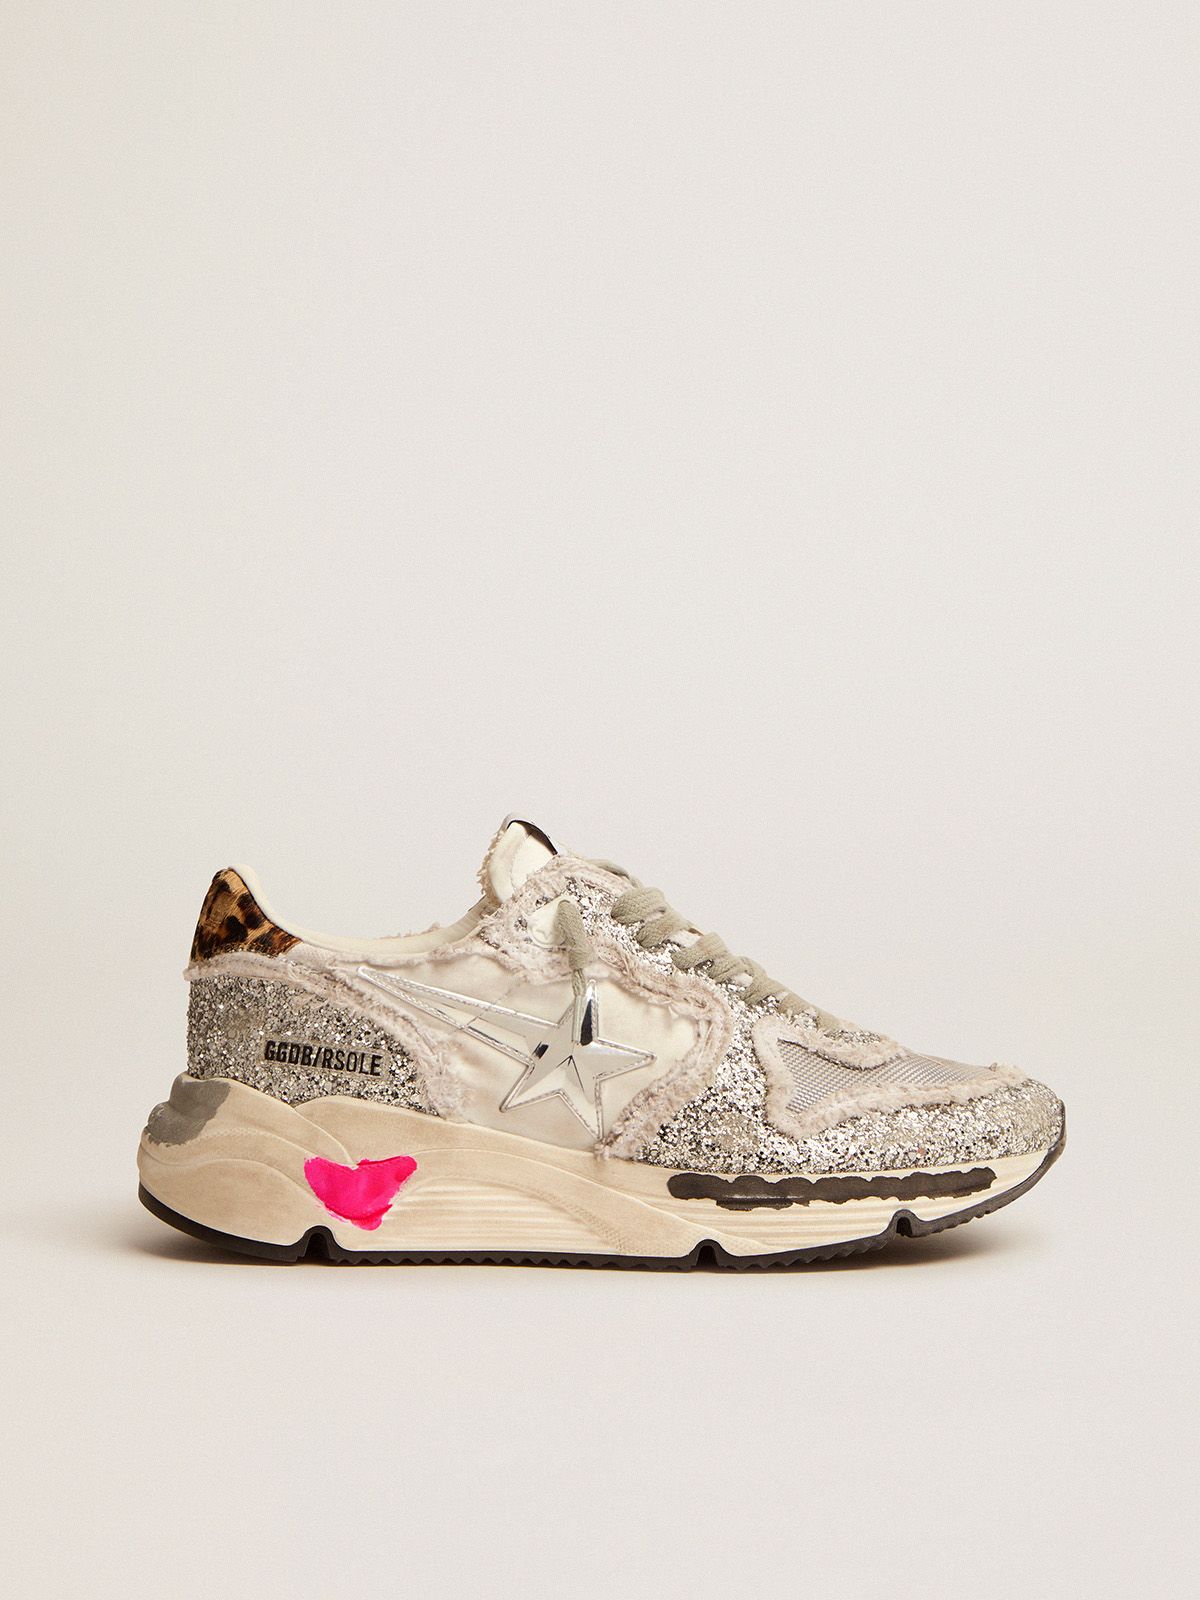 golden goose with Running heel nylon tab skin and pony silver sneakers in glitter Sole leopard-print